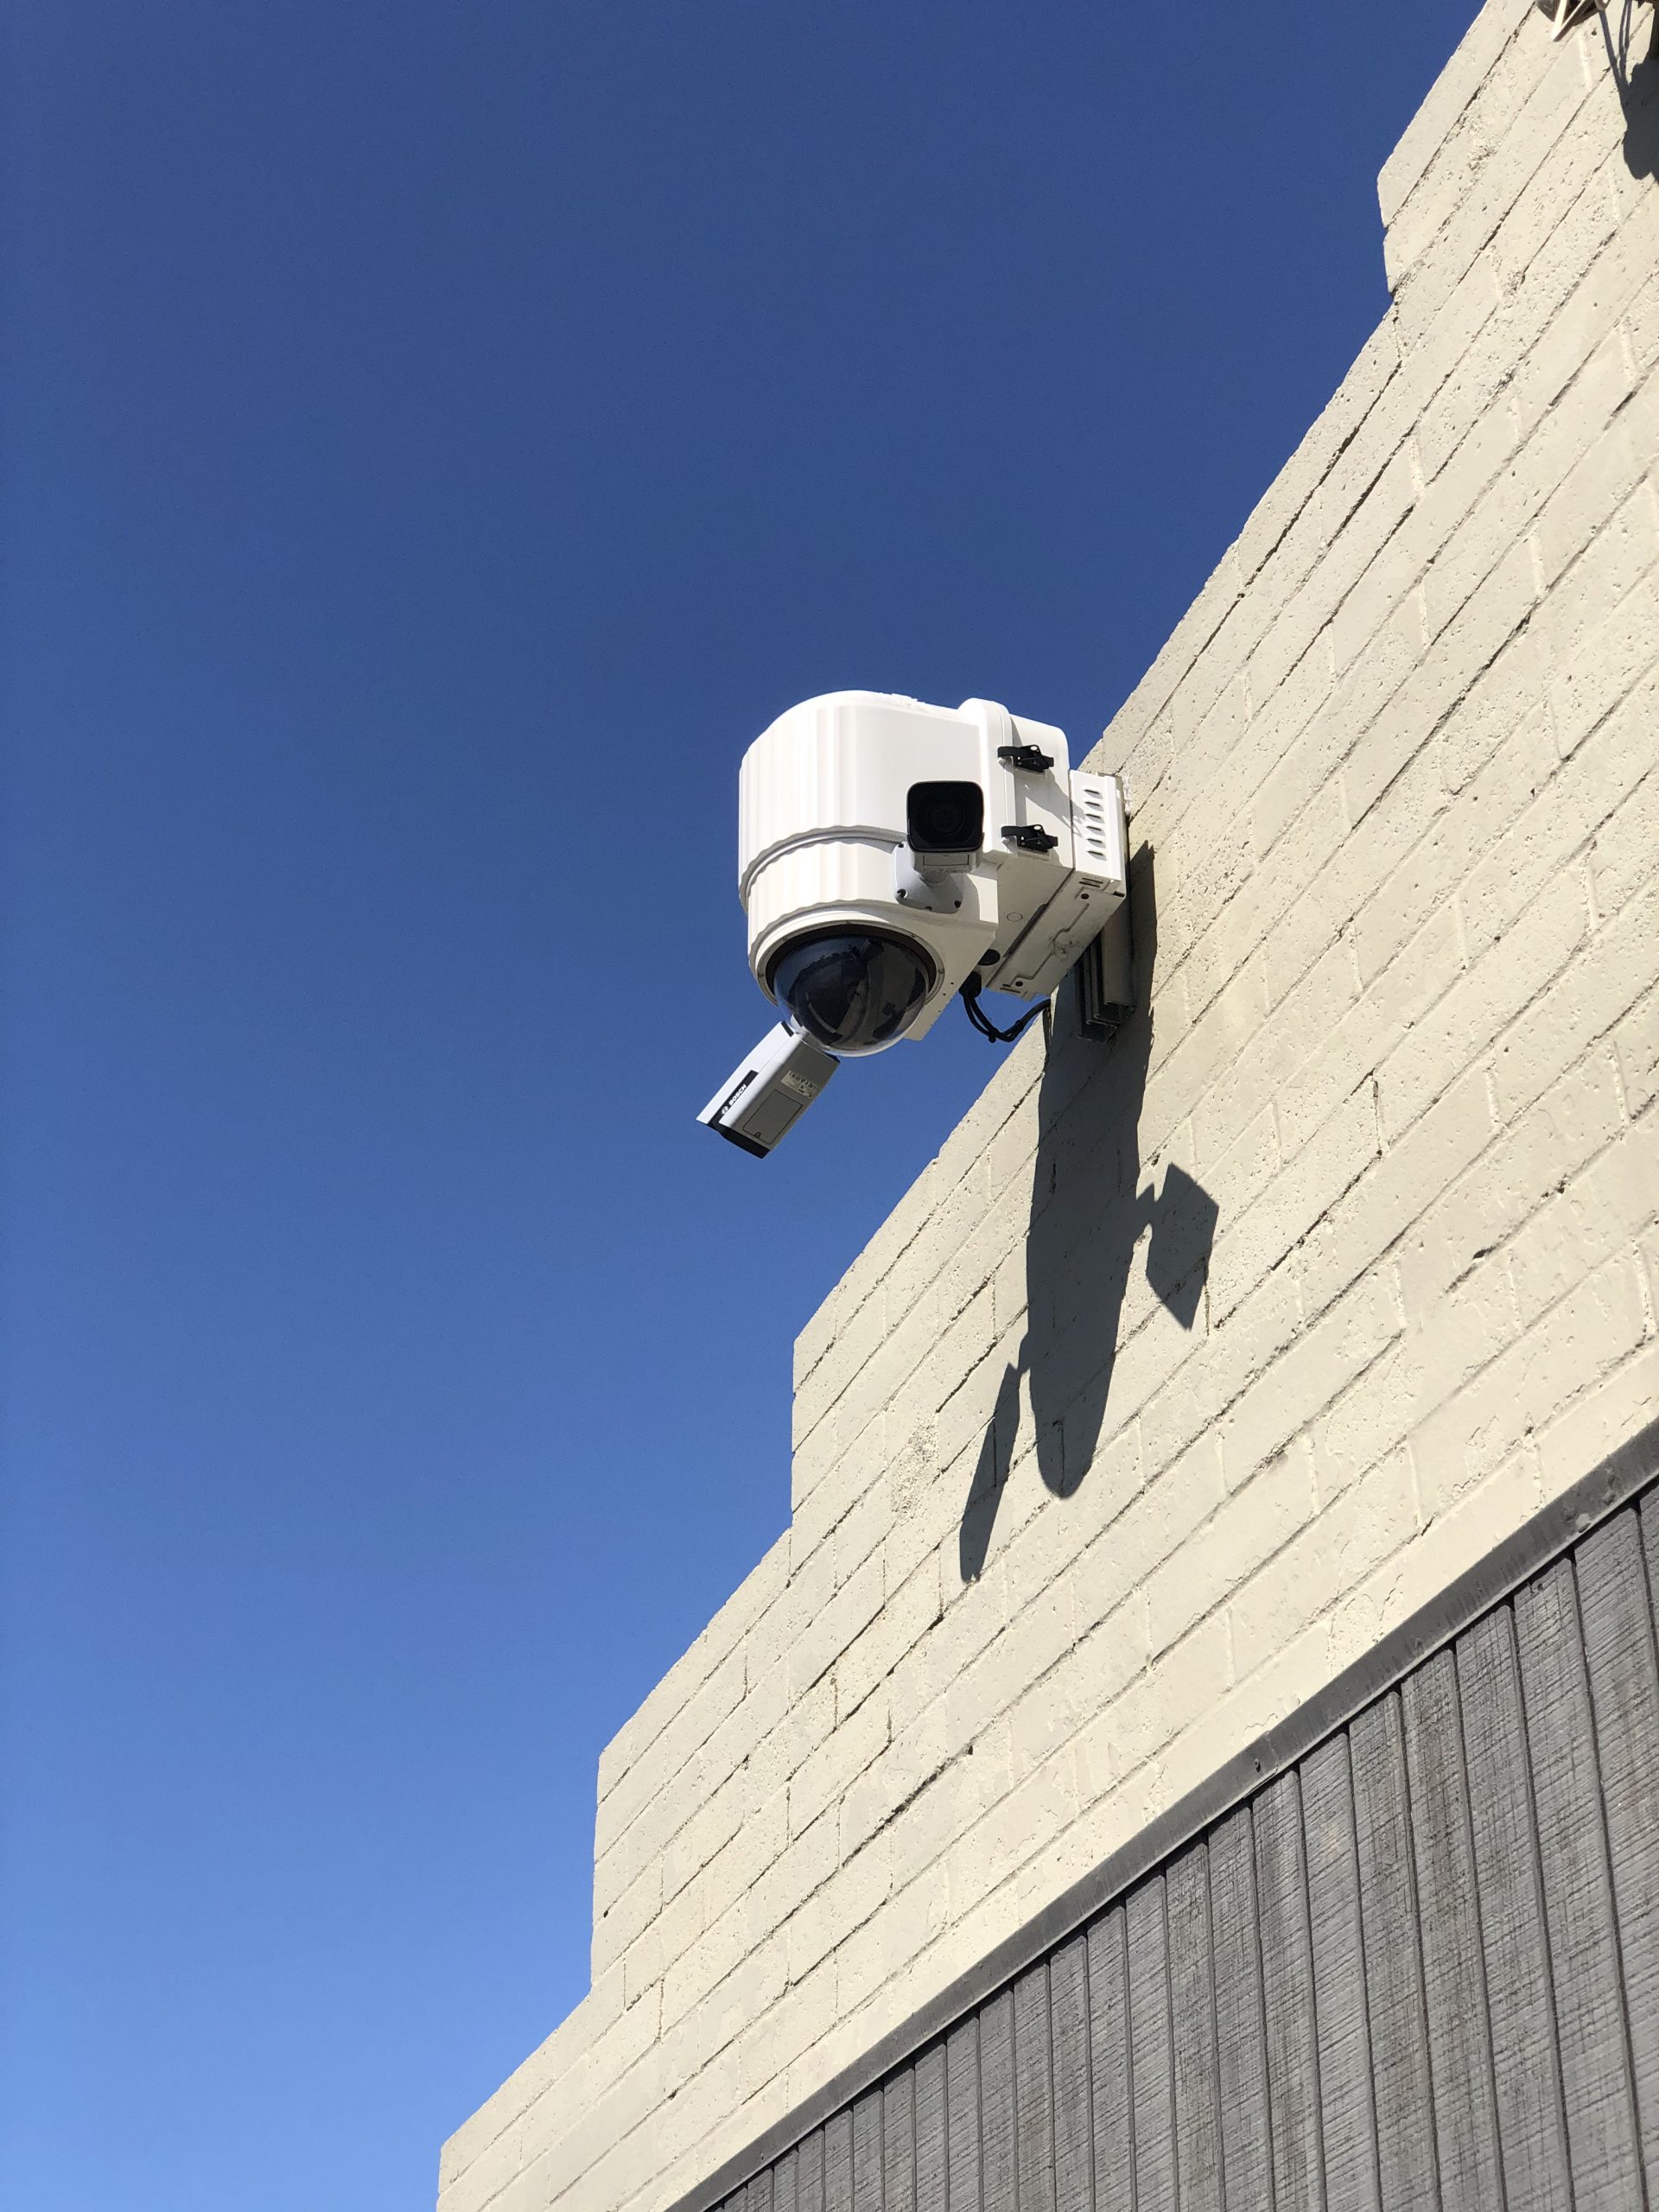 XCold PTZ Camera Enclosure System For Extreme Heat Environments Integrated With Bosch PTZ Autodome Camera And Side Mounted Fixed Bosch Cams 